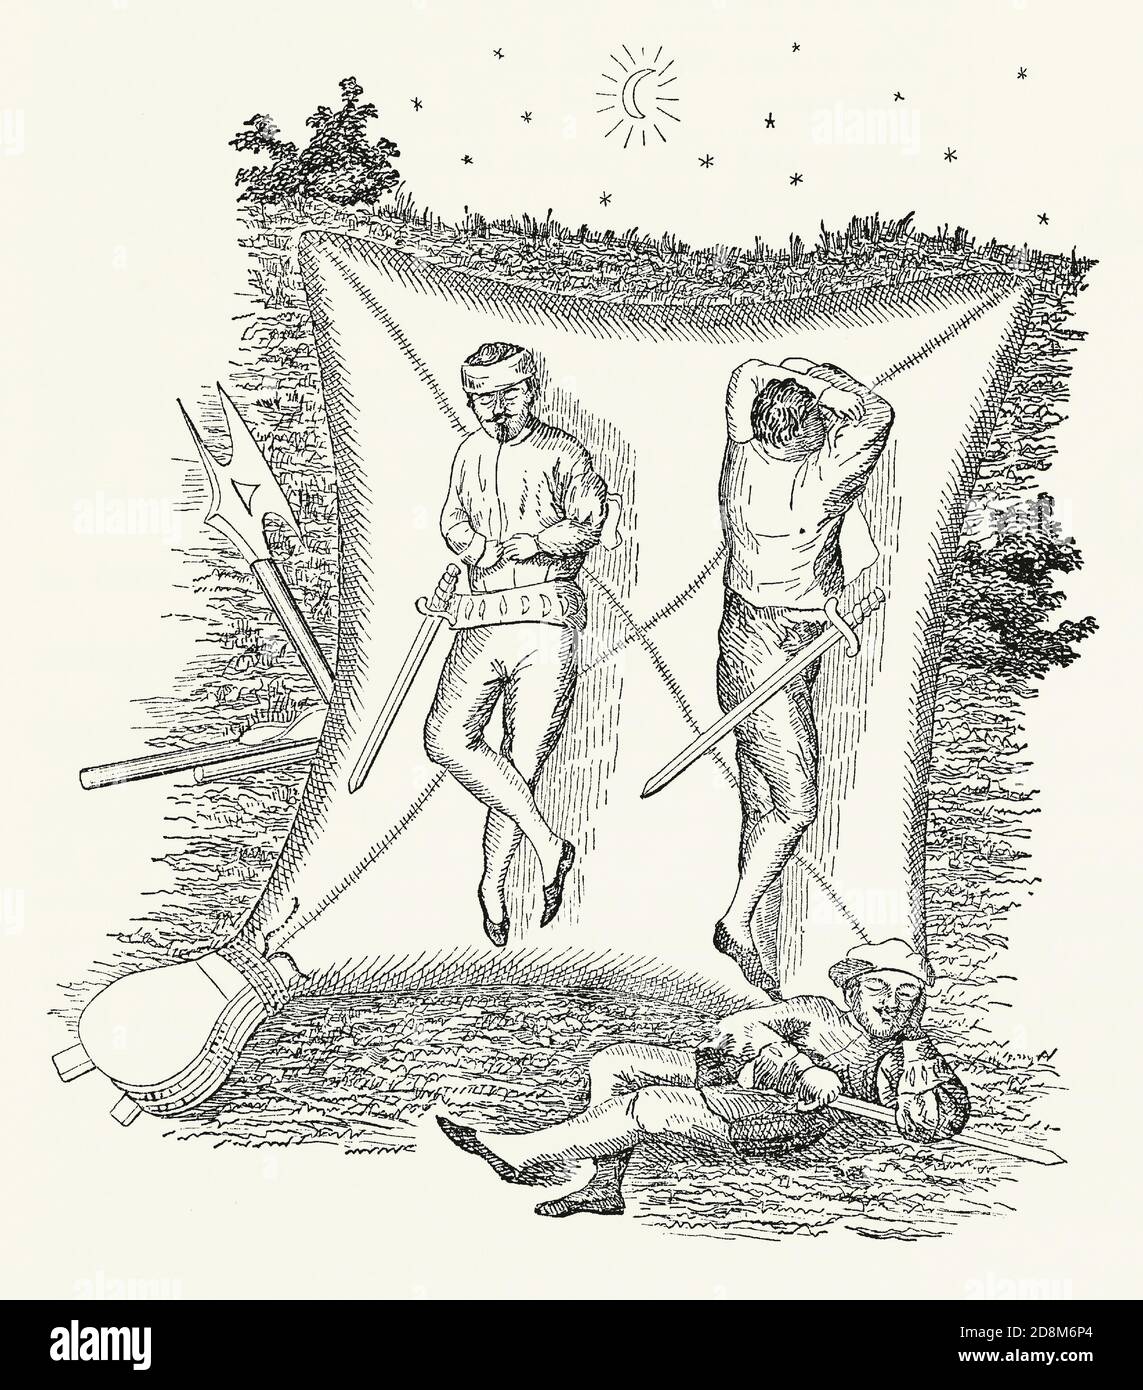 An old engraving of a 16th century soldiers with swords resting in the field on an air-bed. It is from a Victorian mechanical engineering book of the 1880s. The illustration shows that it was inflated by using bellows. The material in this early air-bed would have been strong cloth made airtight using varnish or paint. Air mattresses, pillows and cushions were manufactured commercially from the late 1800s. Stock Photo